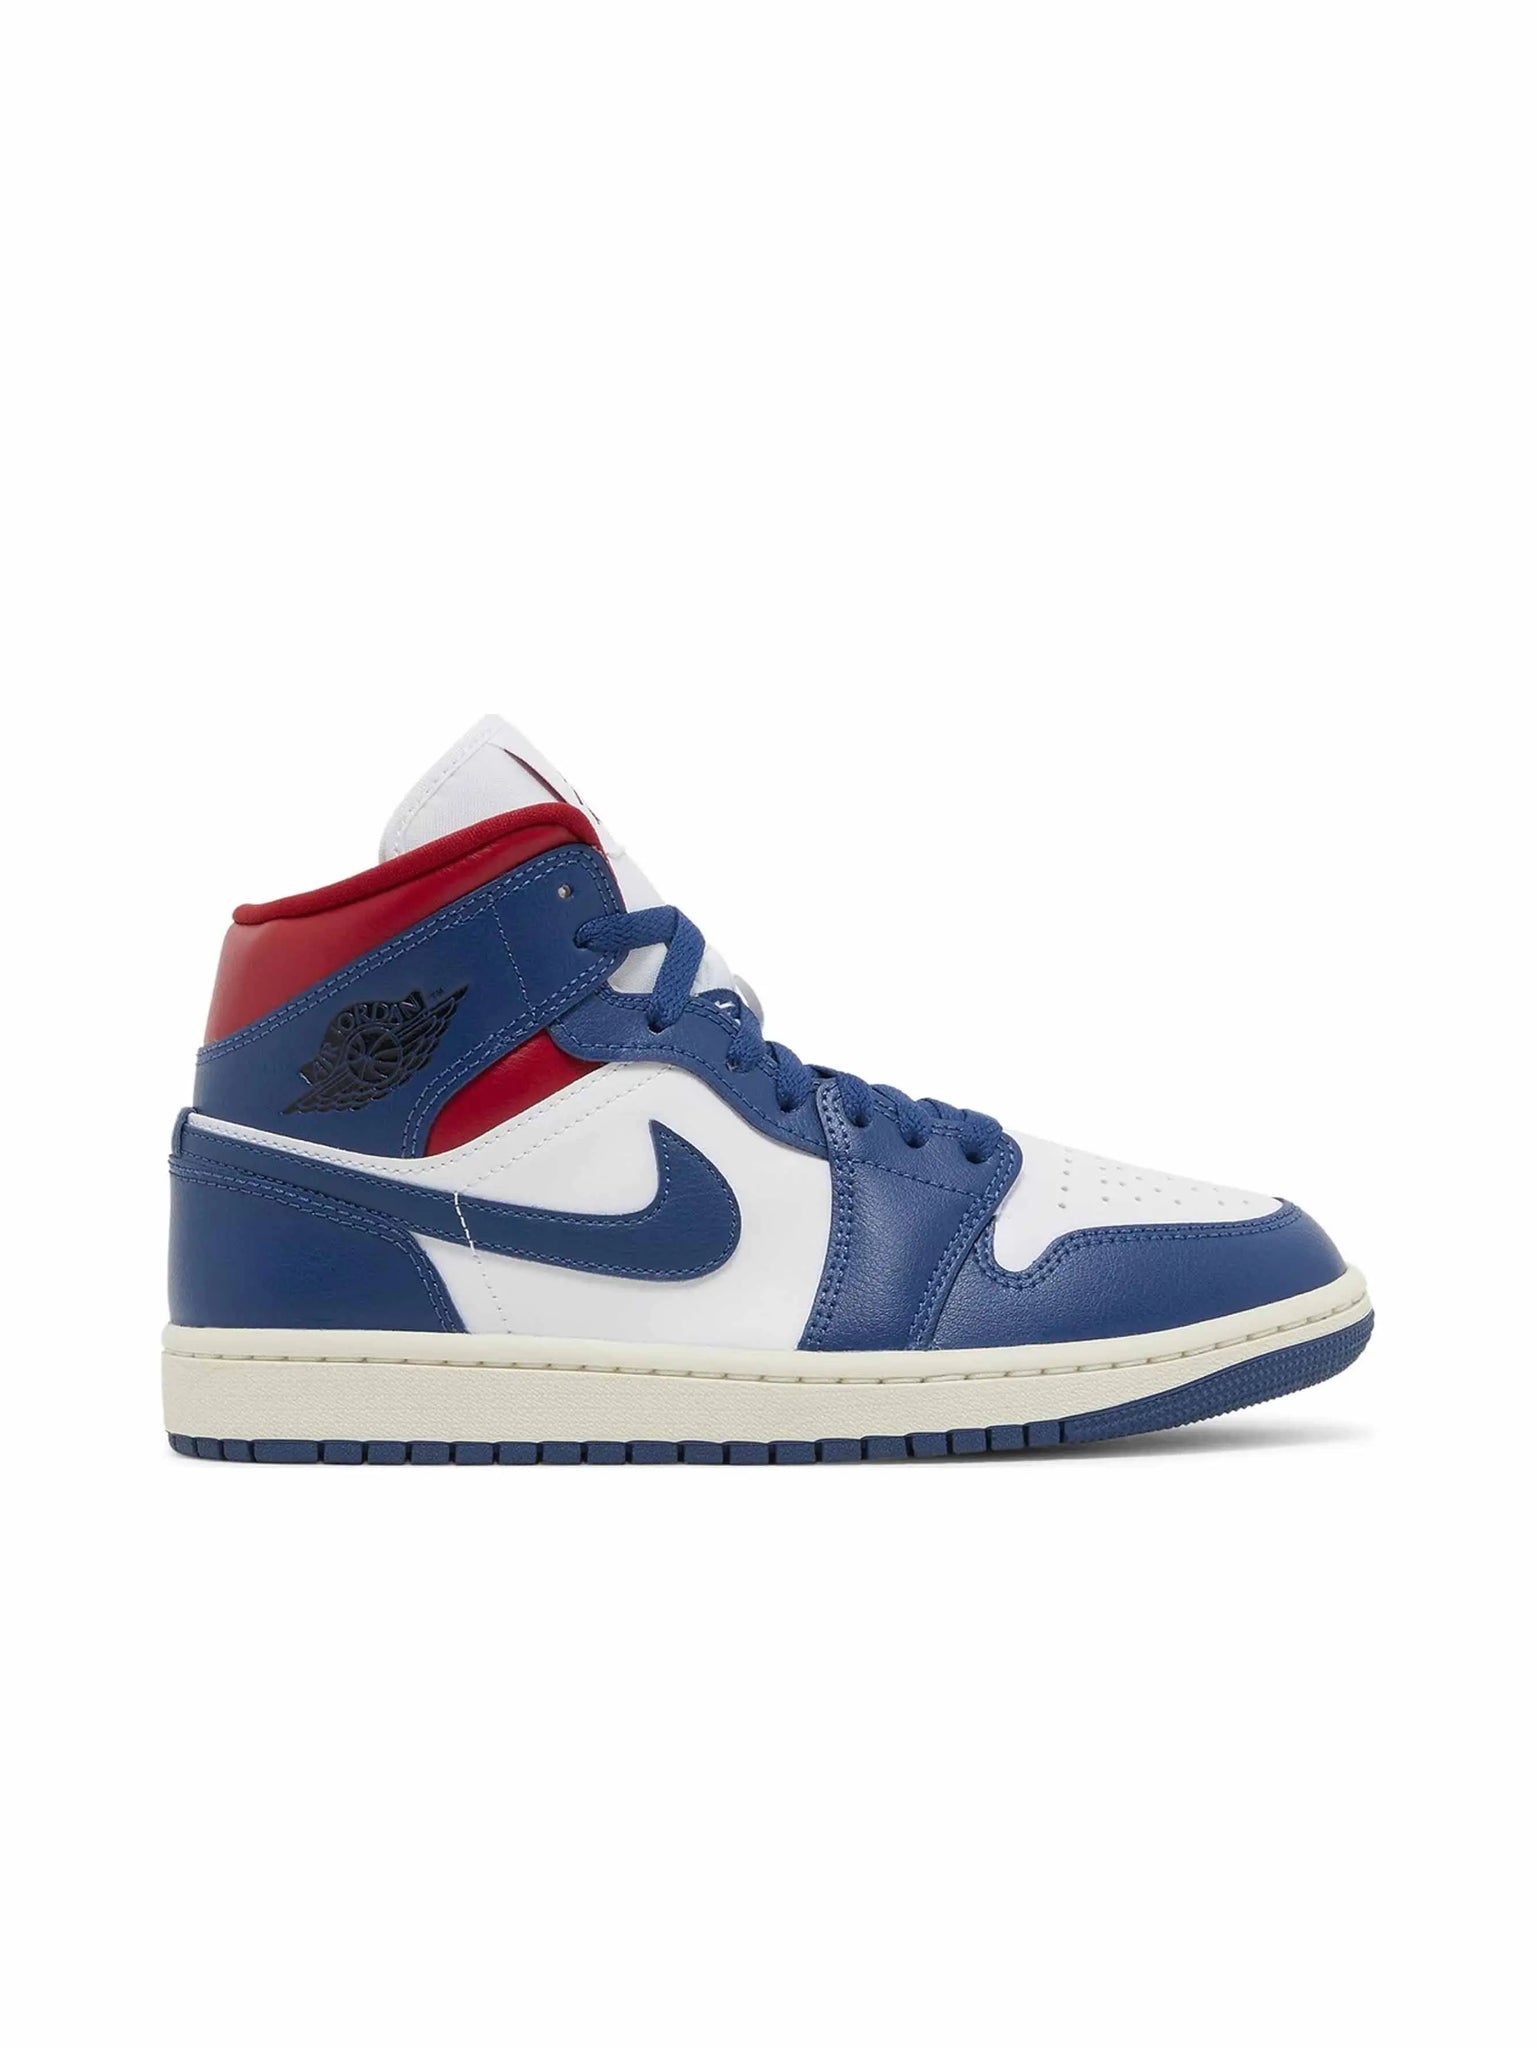 Nike Air Jordan 1 Mid French Blue Gym Red (W) in Auckland, New Zealand - Shop name